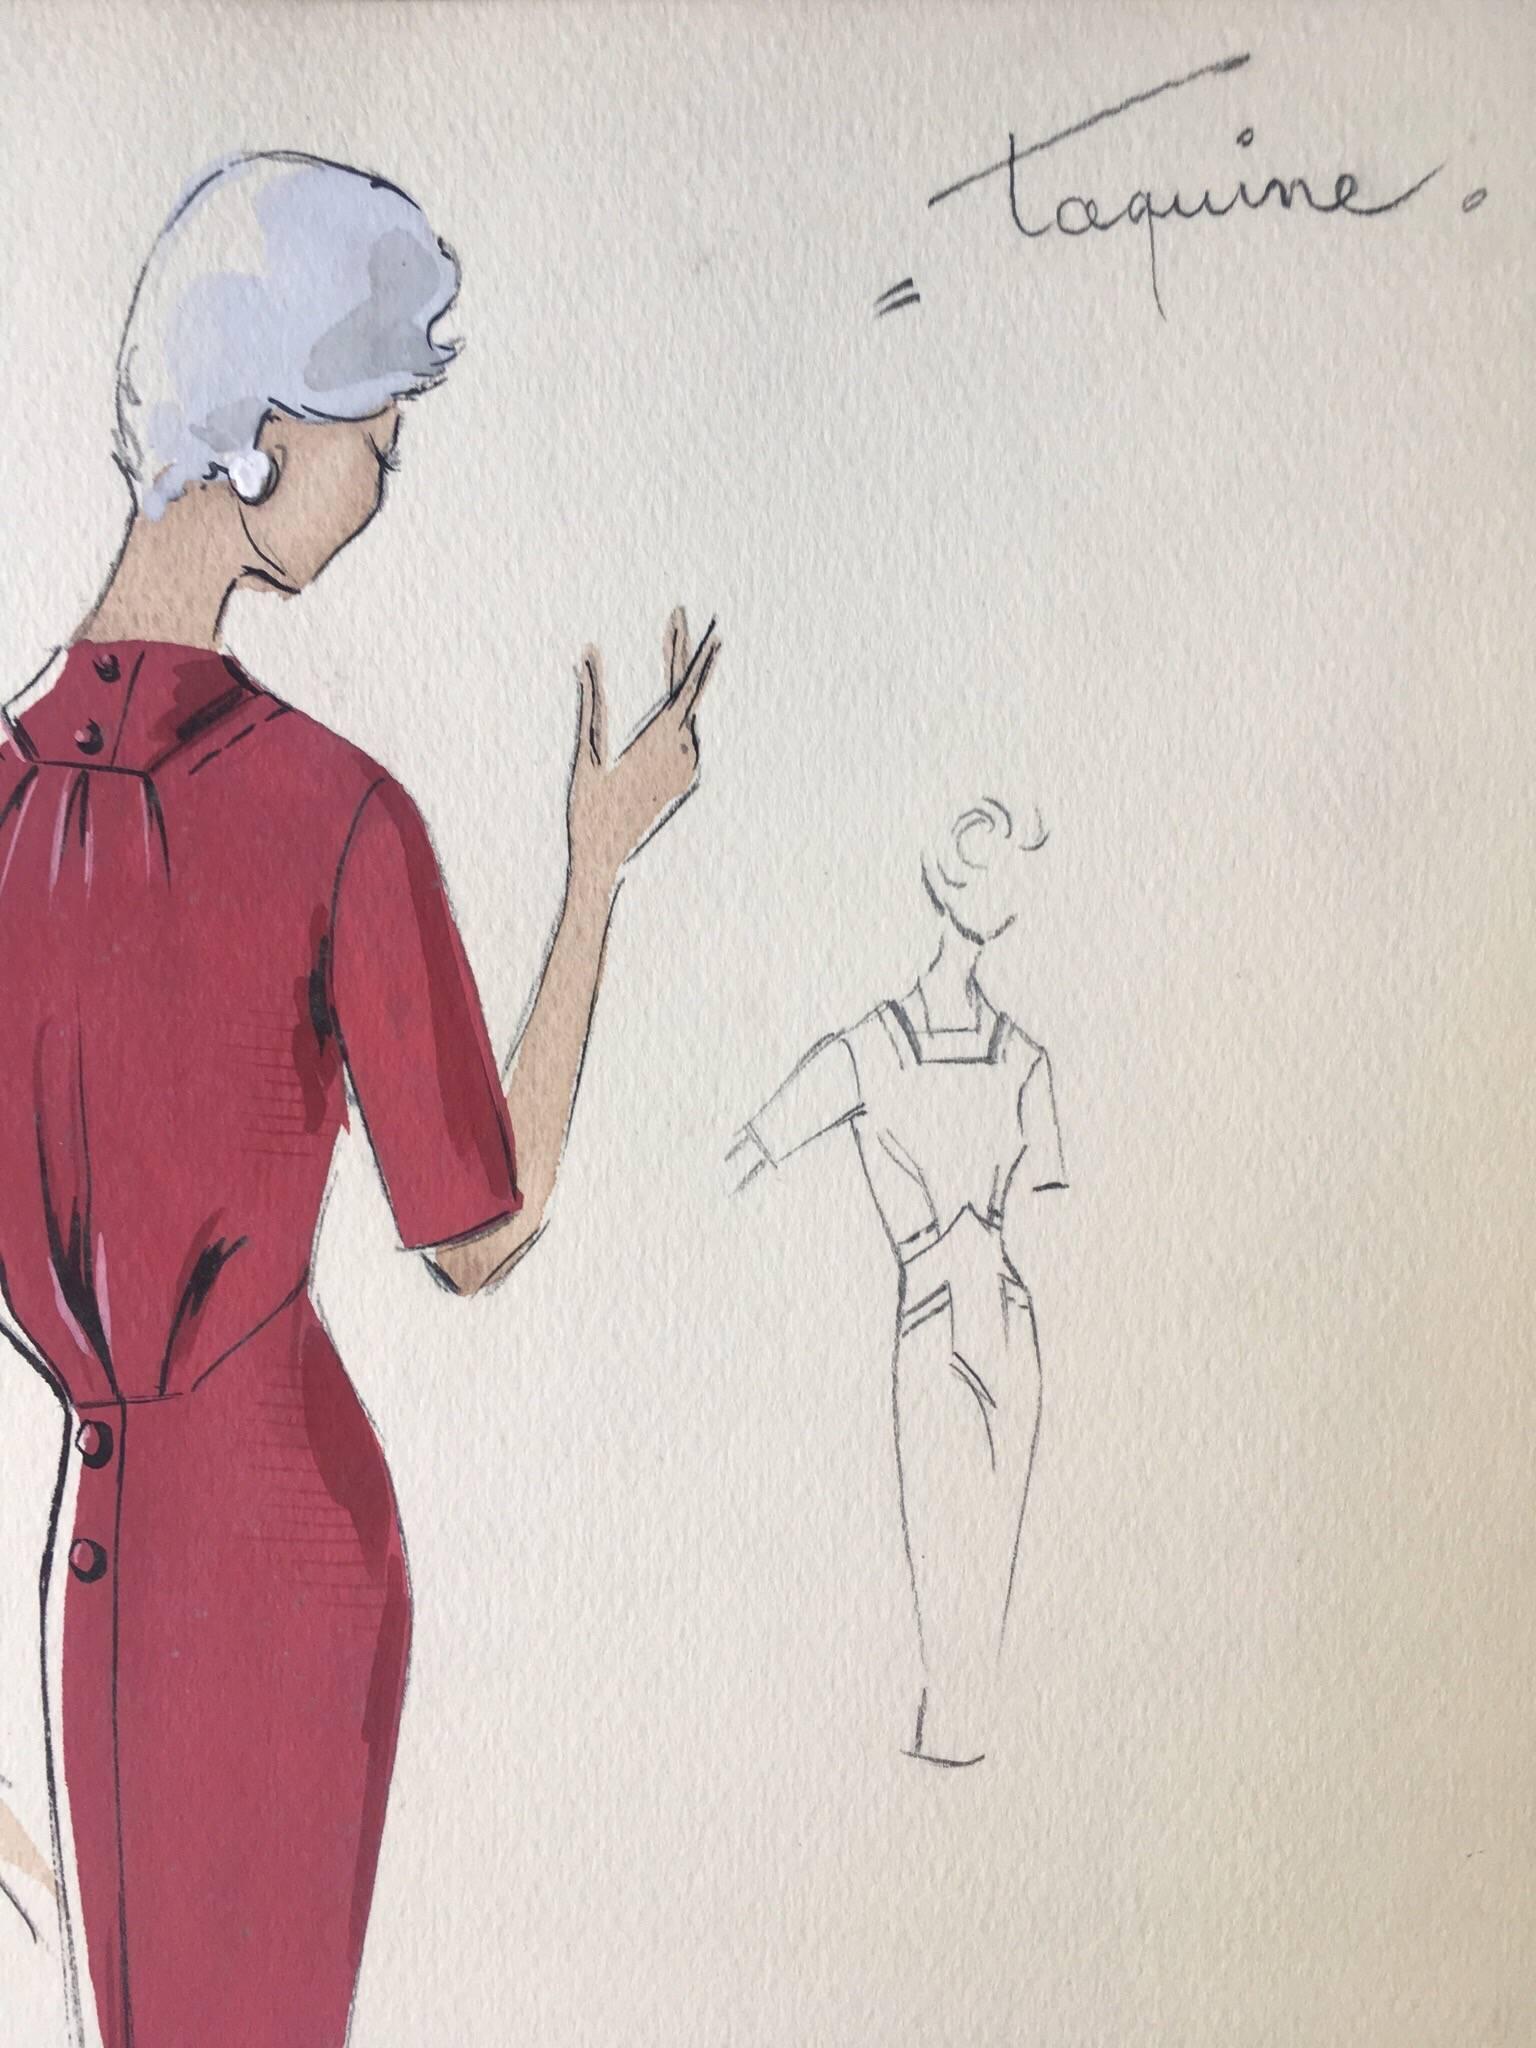 Lady in Elegant 1950's Red Dress Parisian Fashion Illustration Sketch - Art by Unknown